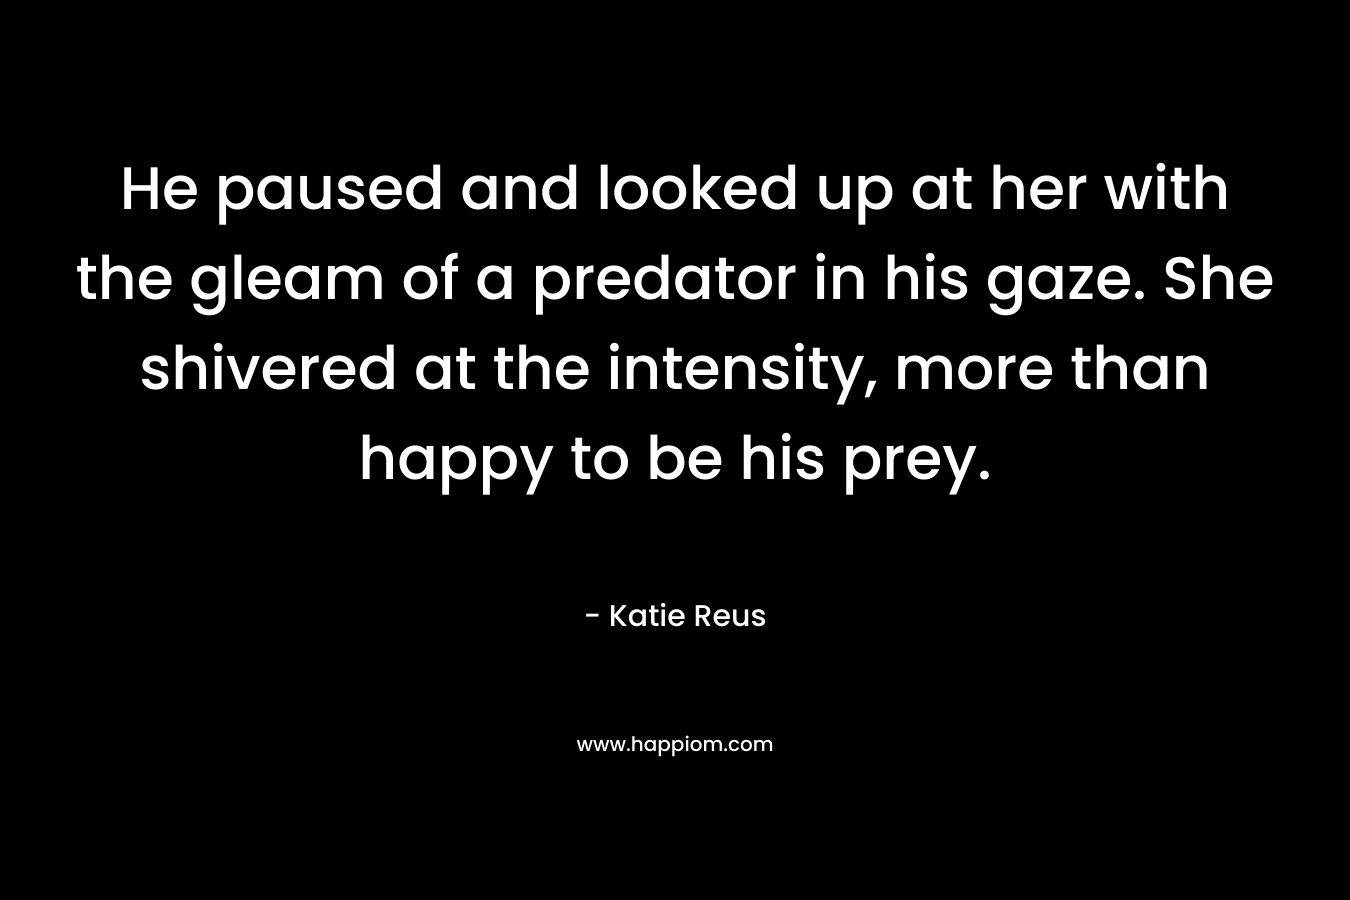 He paused and looked up at her with the gleam of a predator in his gaze. She shivered at the intensity, more than happy to be his prey. – Katie Reus